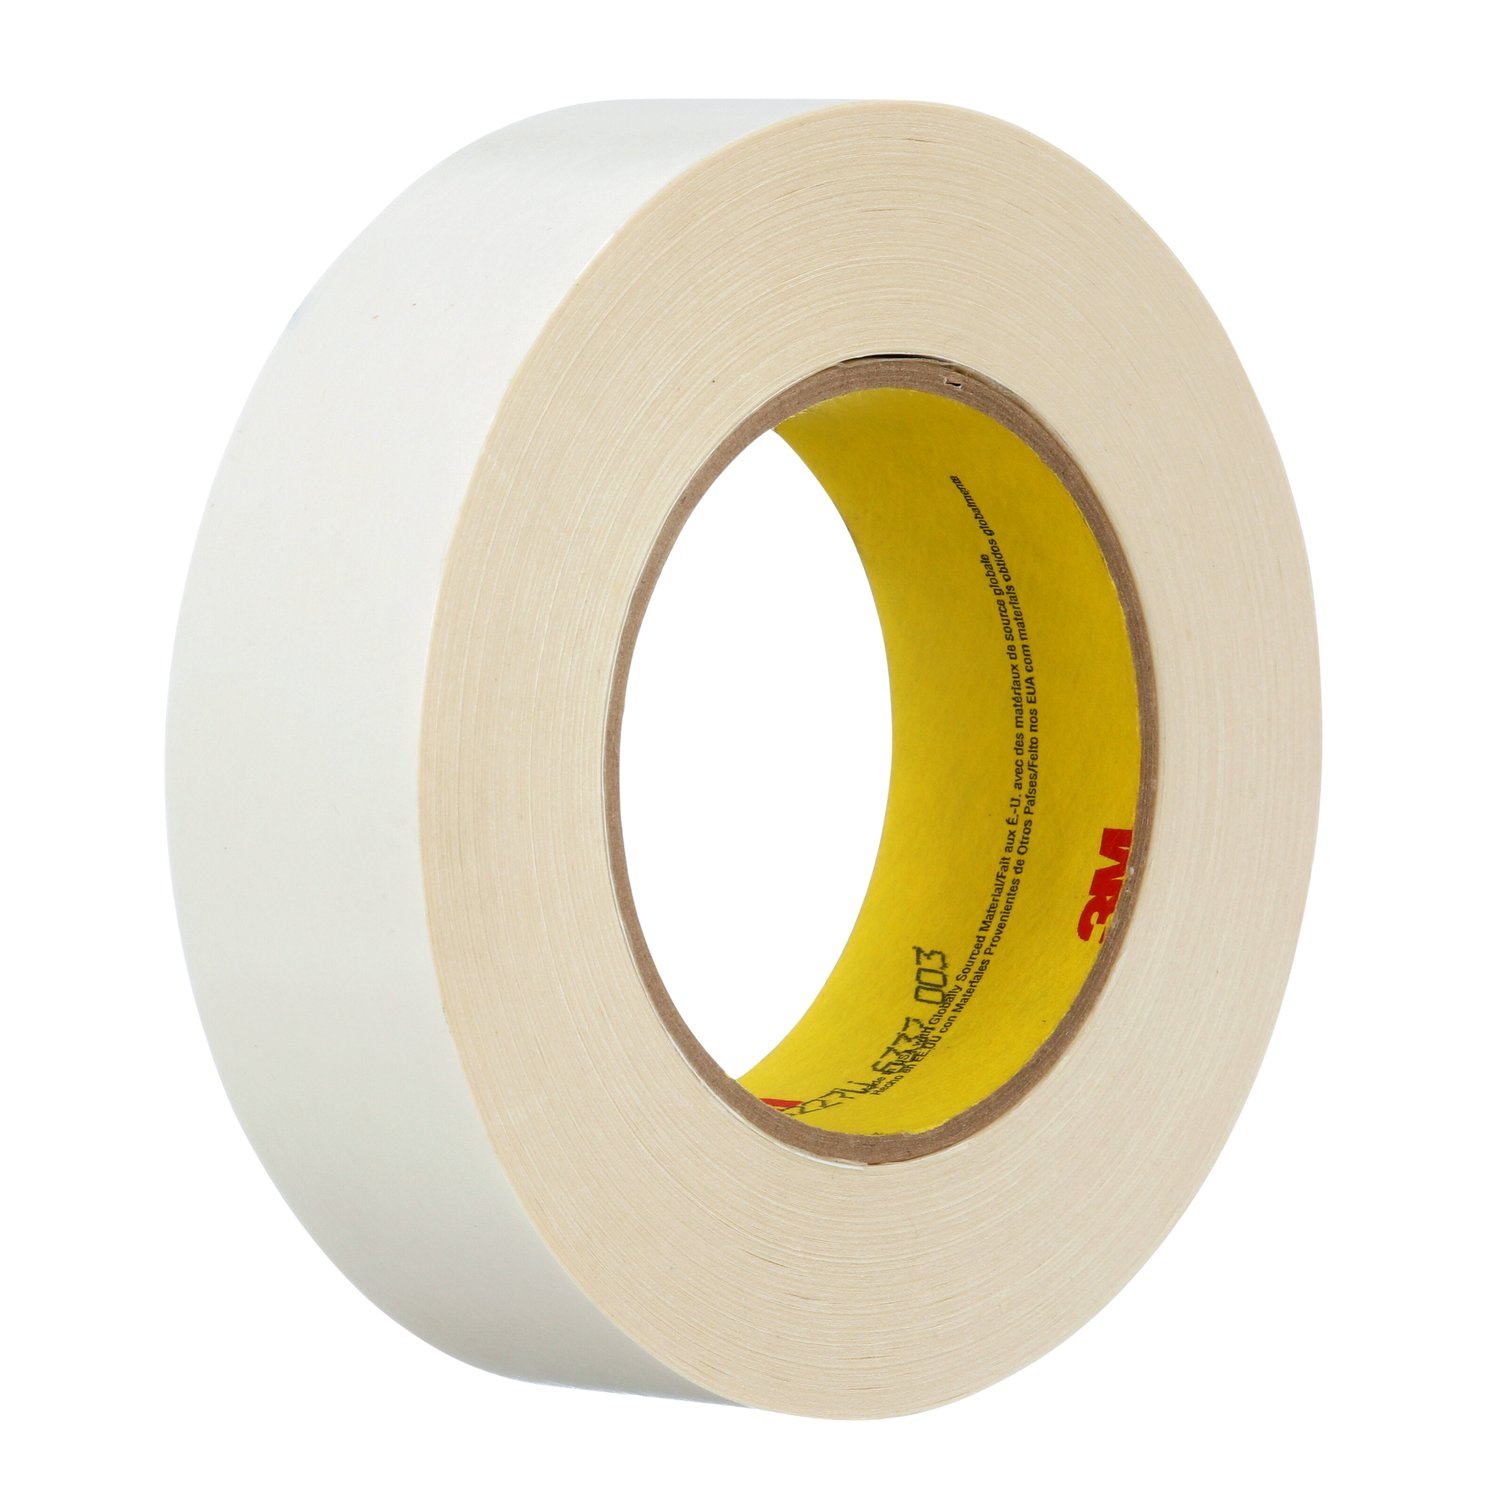 7100028148 - 3M Repulpable Double Coated Tape R3227, White, 24 mm x 55 m, 3.5 mil,
36 Roll/Case